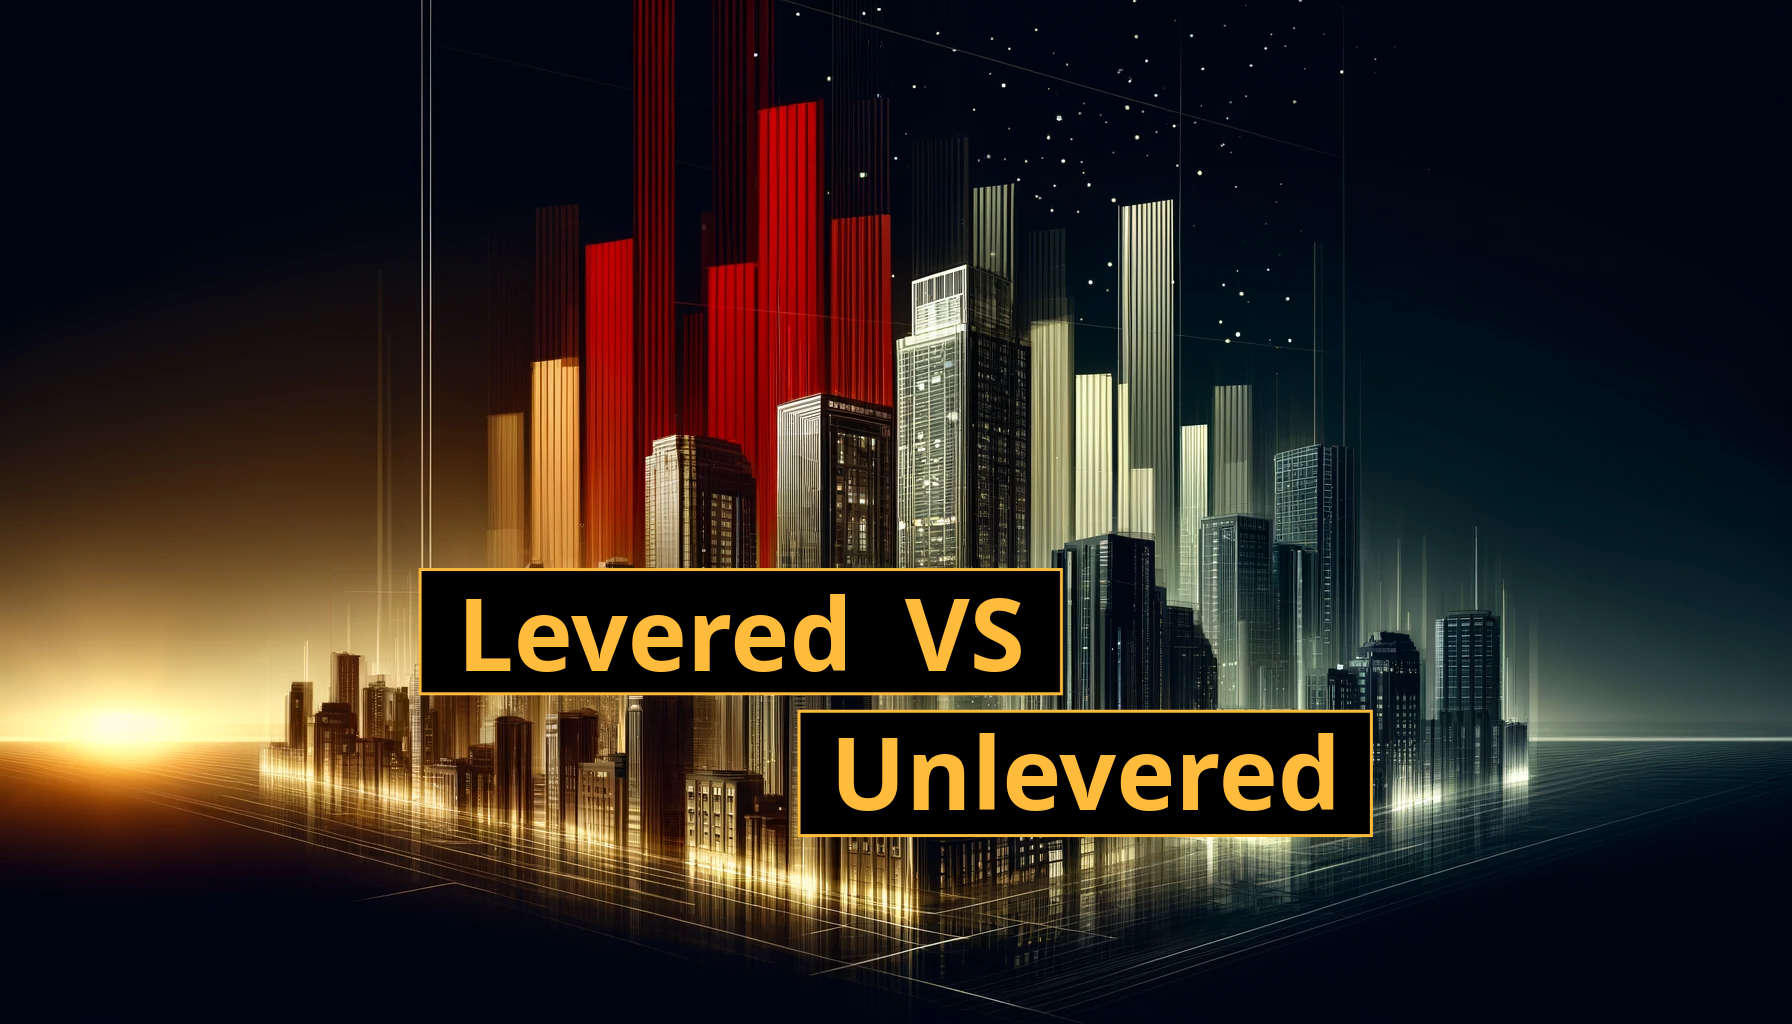 A Guide to Levered & Unlevered Returns